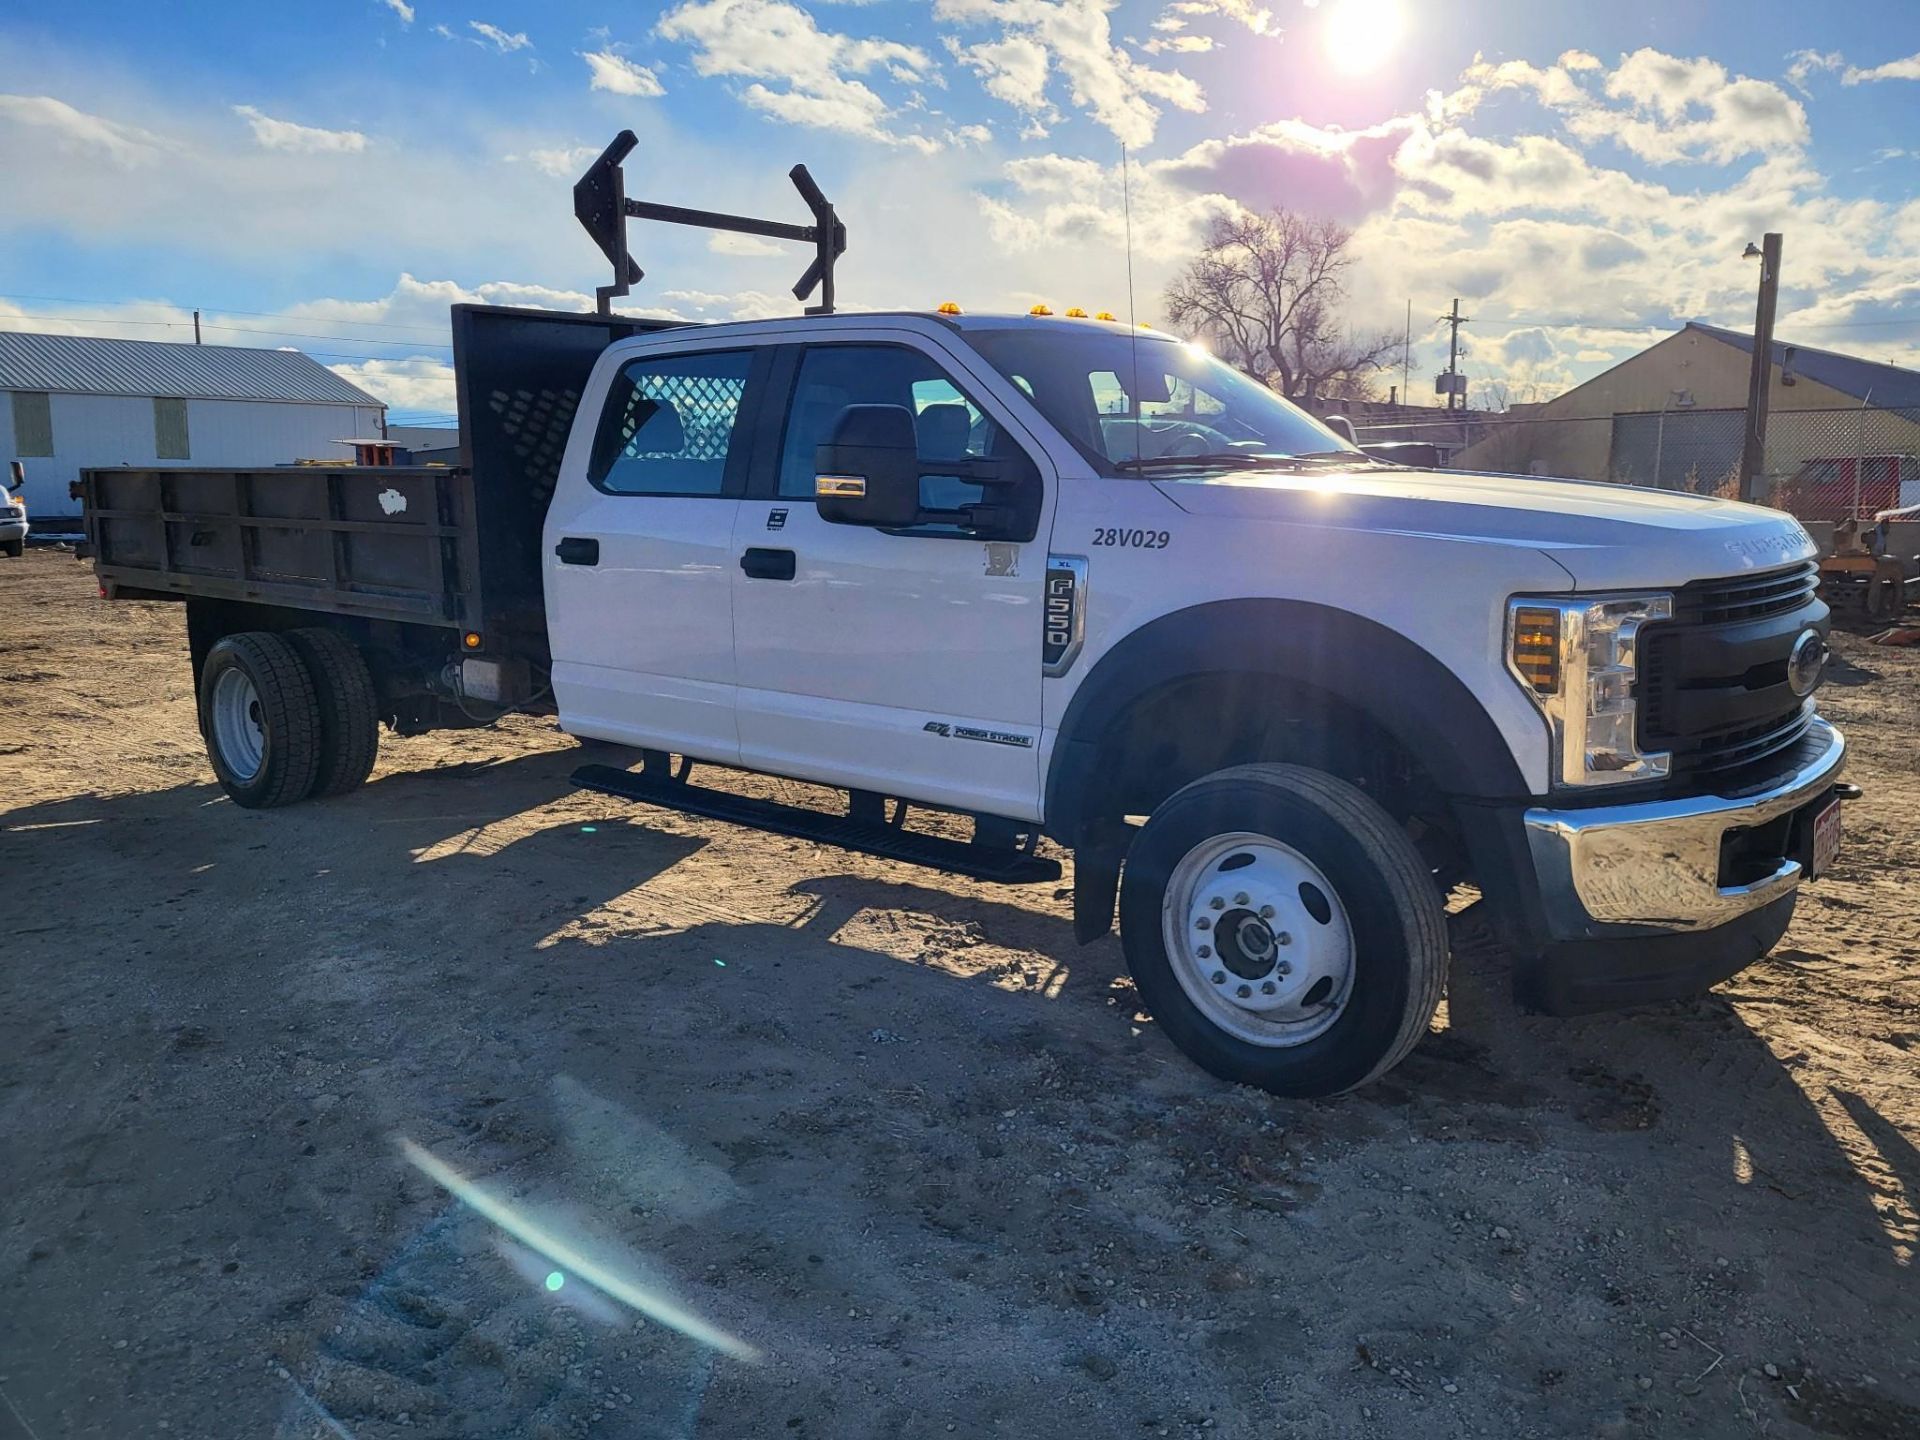 2019 FORD F550 CREW CAB DIESEL DUALLY DUMP TRUCK 31,872 MILES - Image 5 of 34